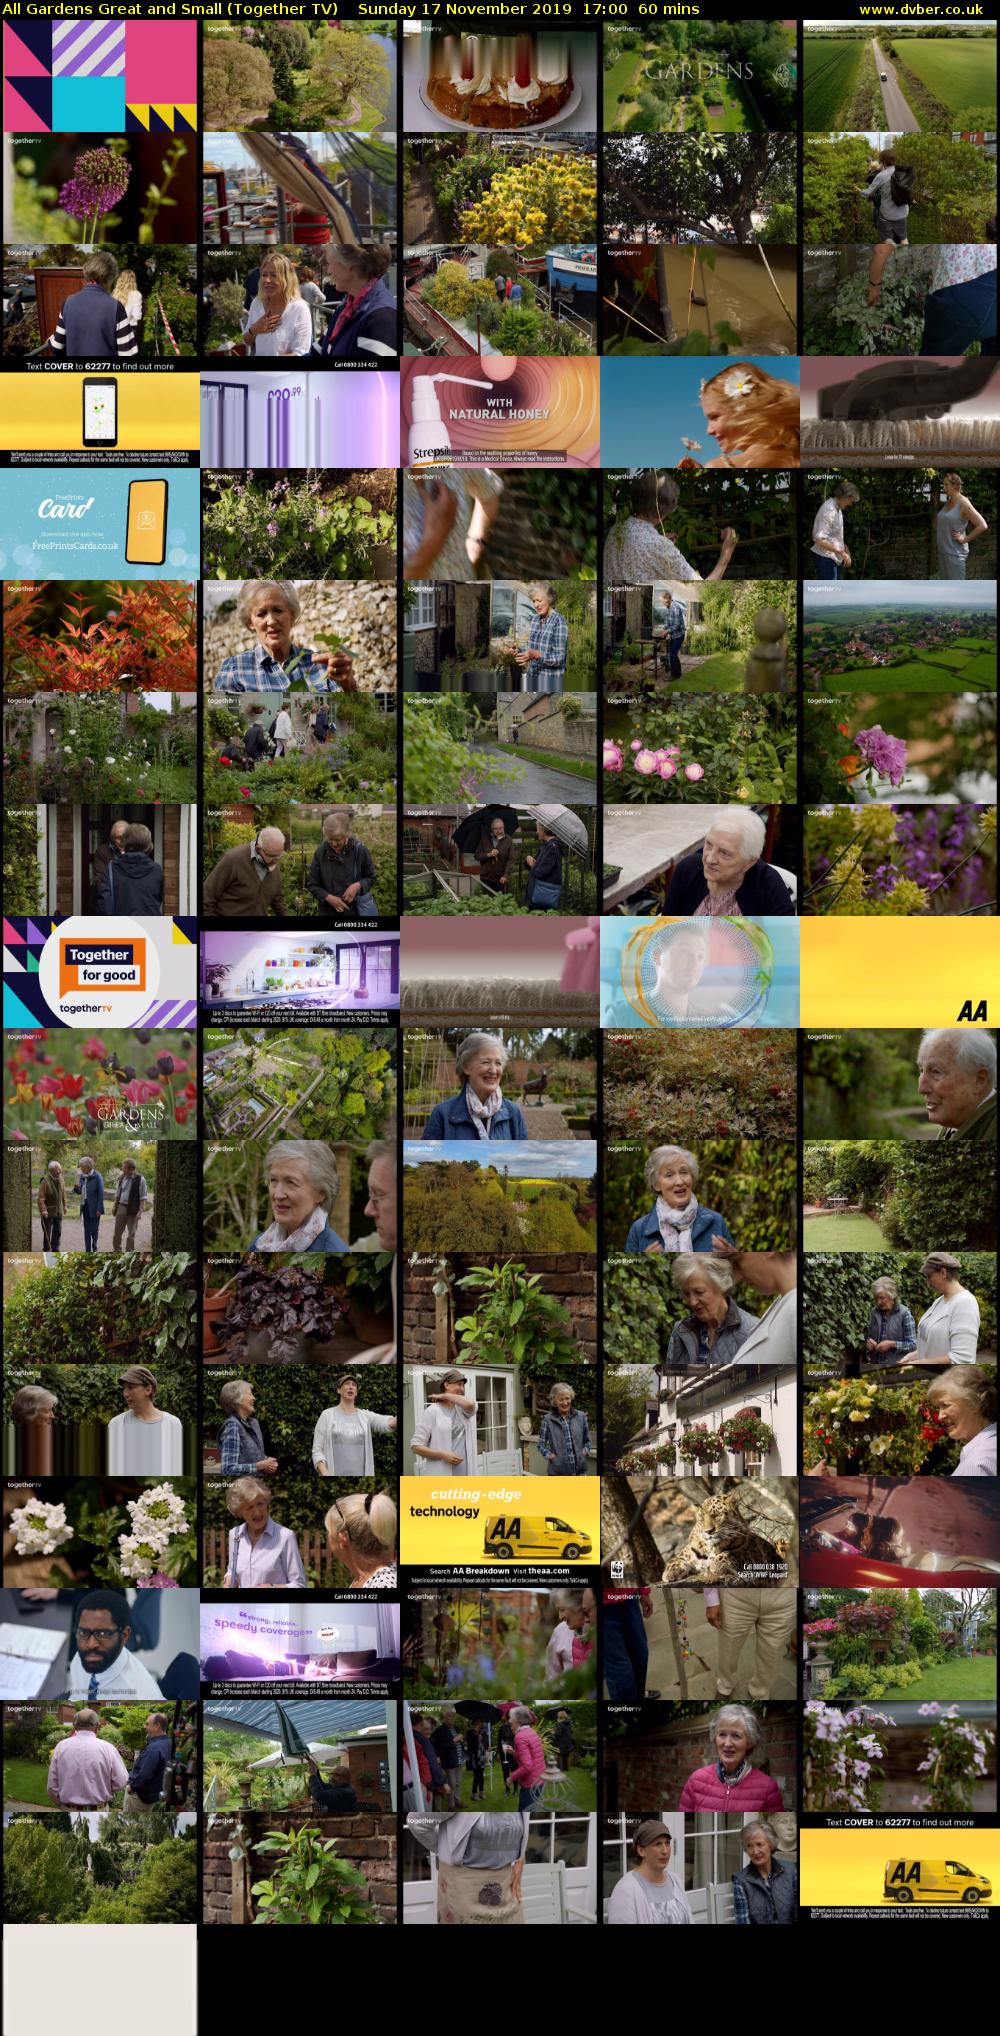 All Gardens Great and Small (Together TV) Sunday 17 November 2019 17:00 - 18:00